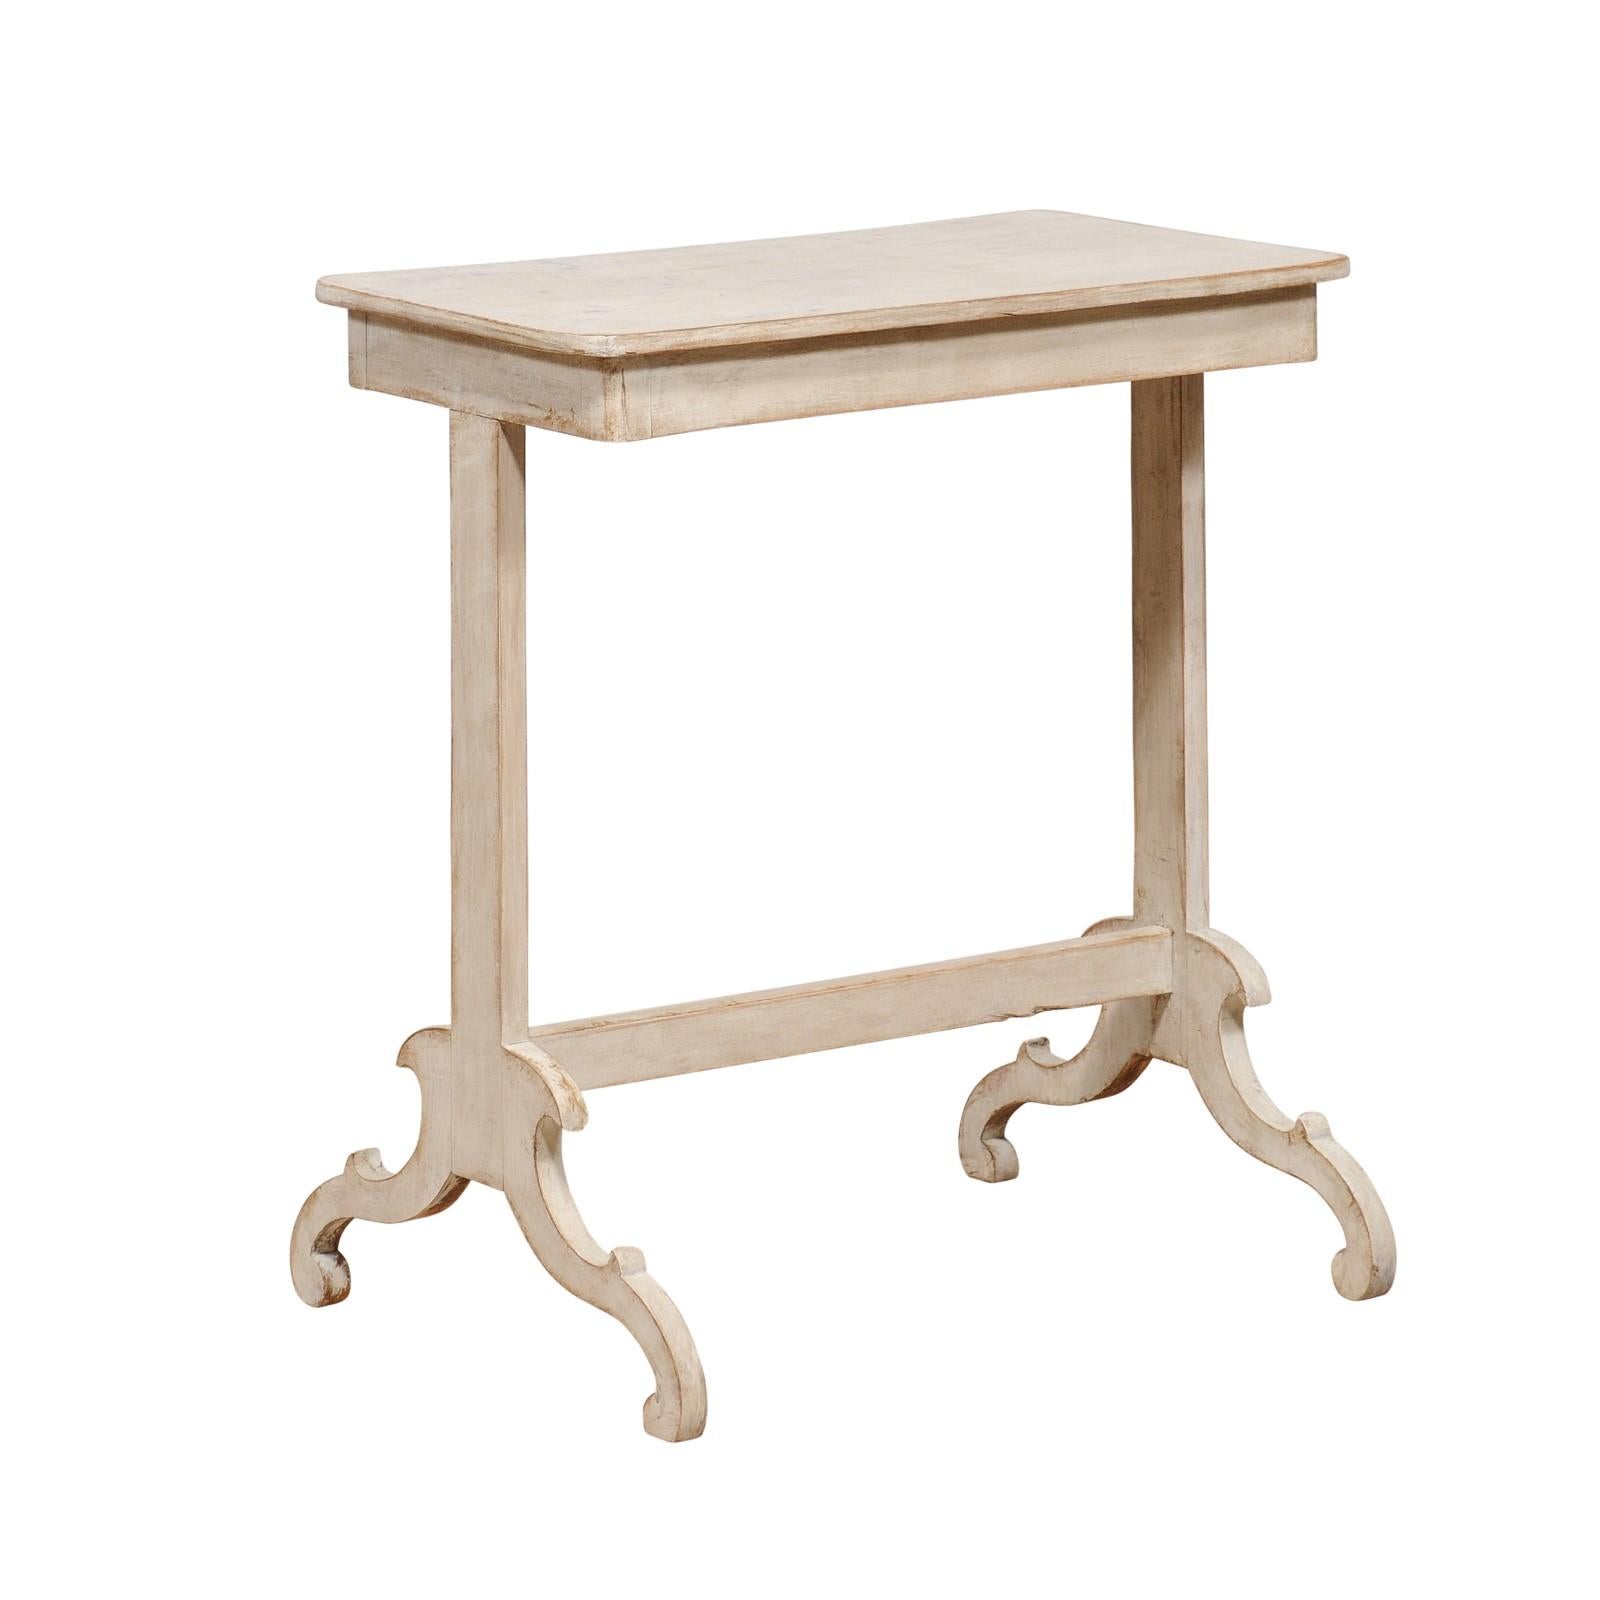 A Swedish side table from the 19th century with light gray painted finish and carved trestle base. Unveil the understated elegance of this 19th-century Swedish side table, a genuine antique treasure that whispers tales of yore. Coated in a serene